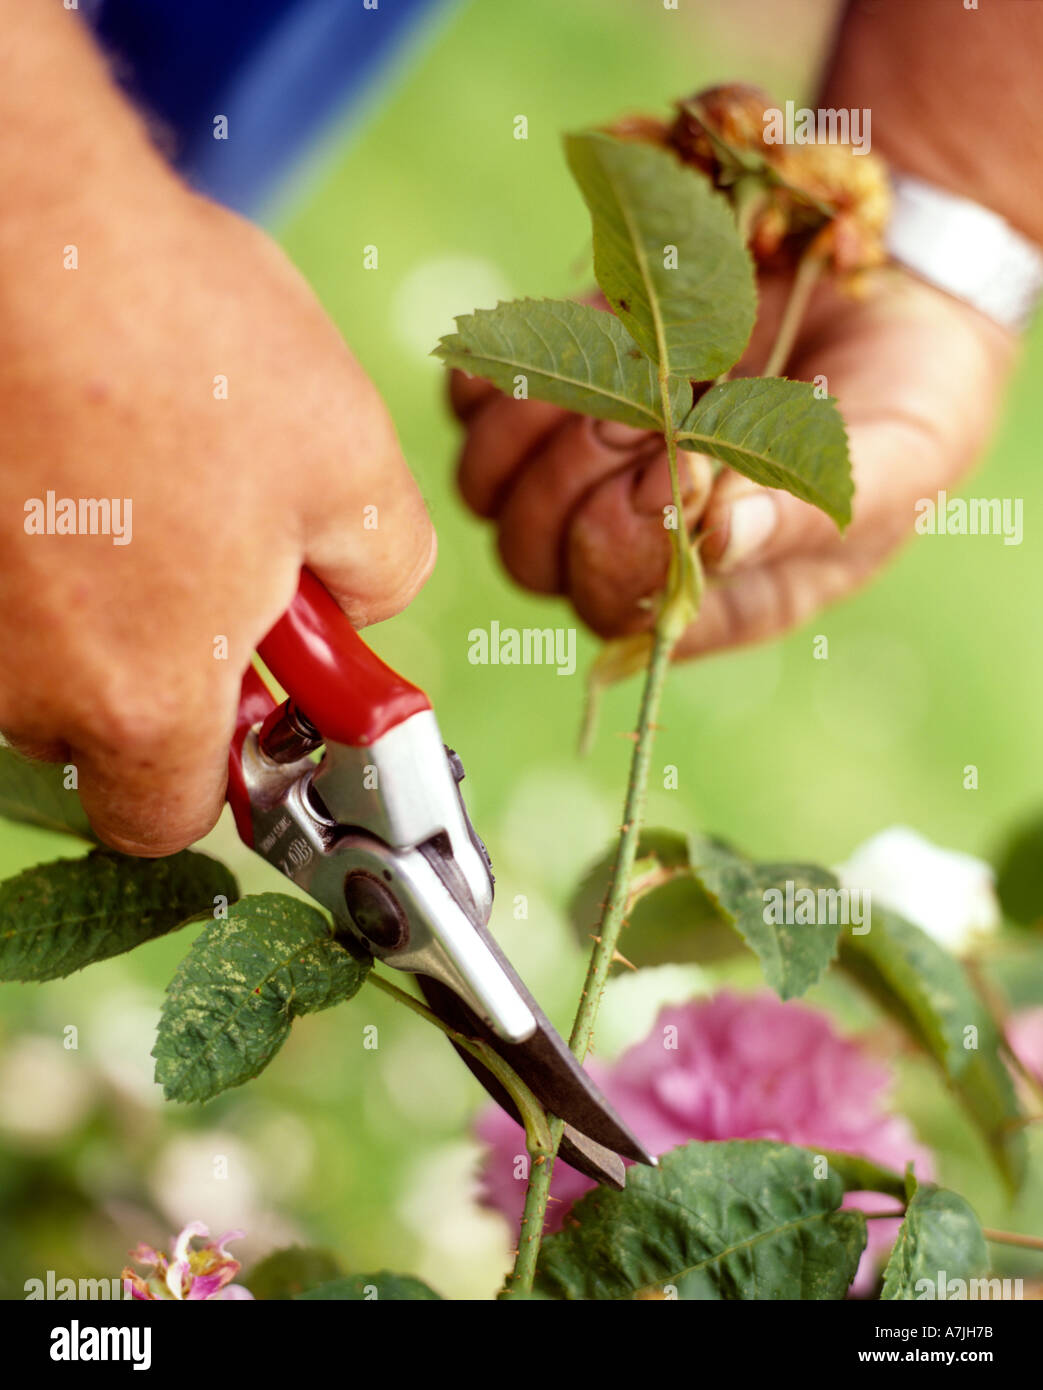 ROSES BEING PRUNED WITH SECATEURS Stock Photo